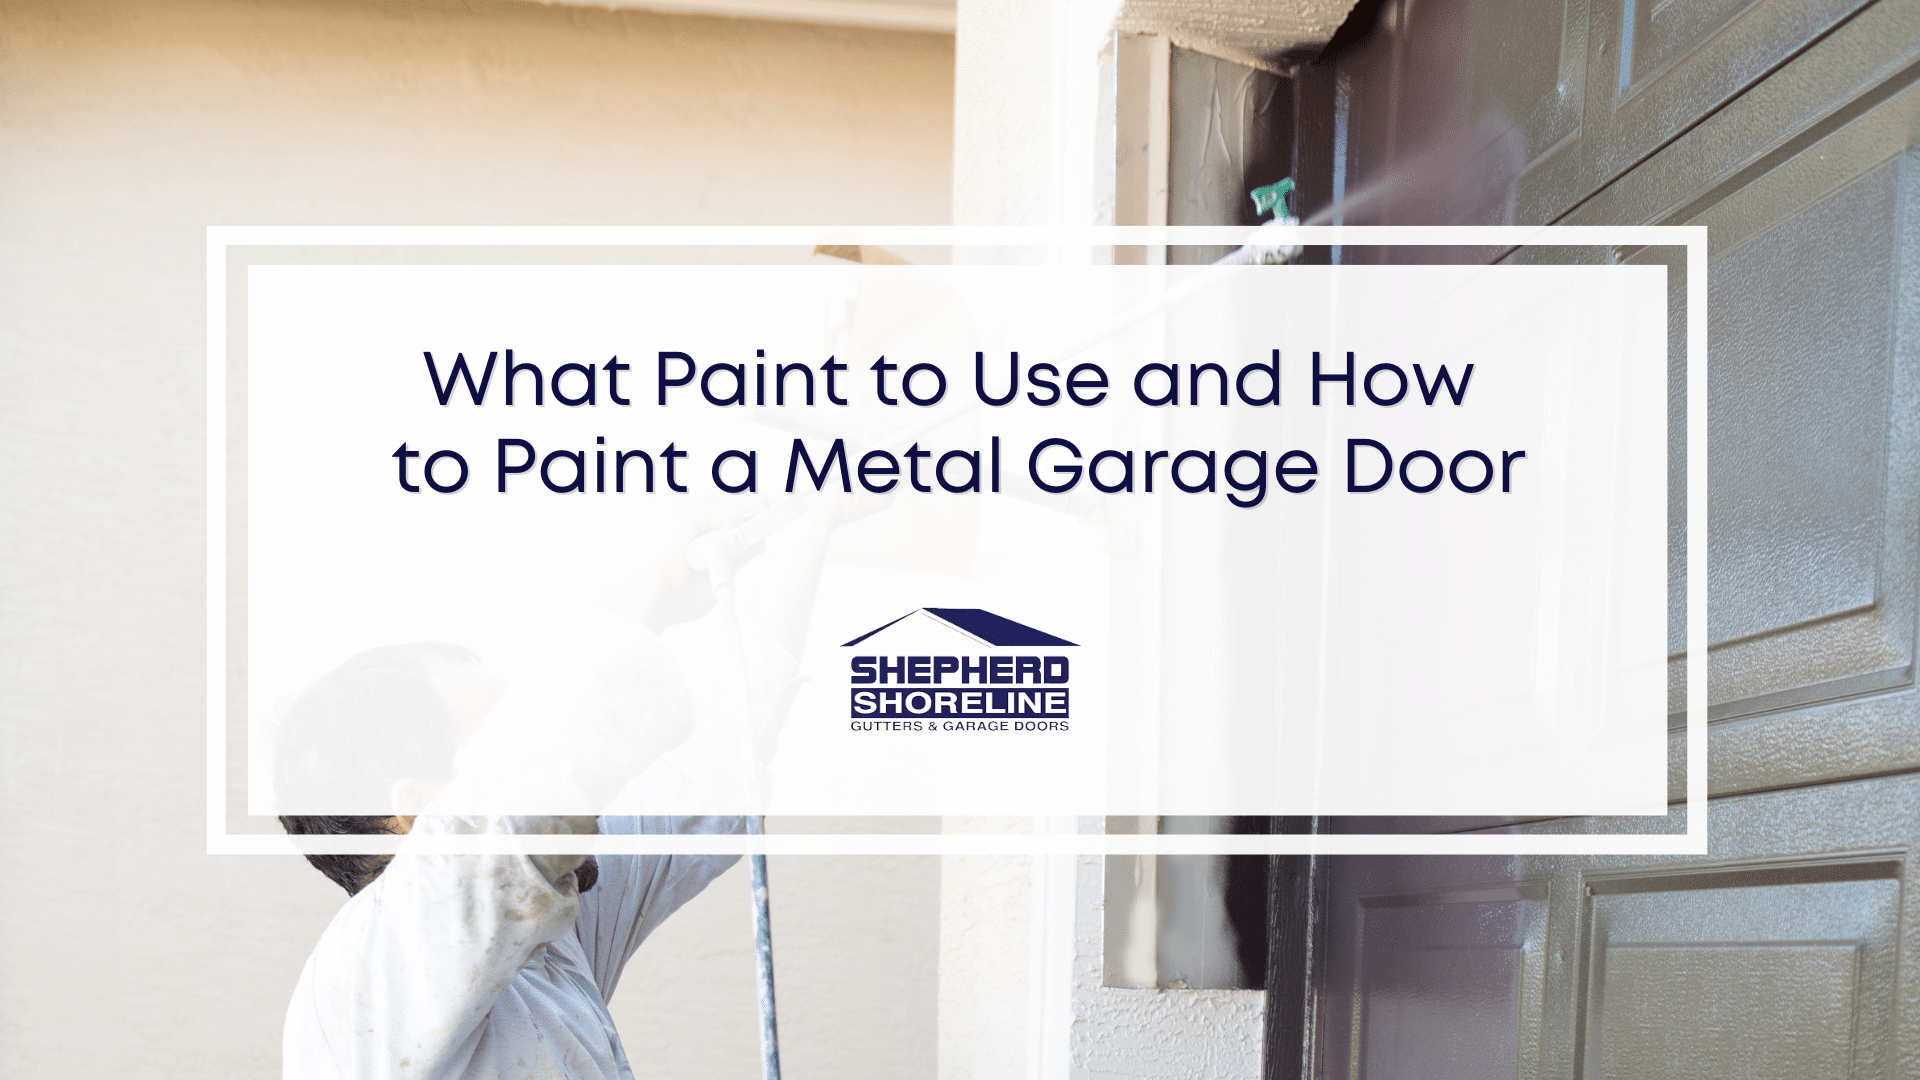 Featured image of what paint to use and how to paint a metal garage door